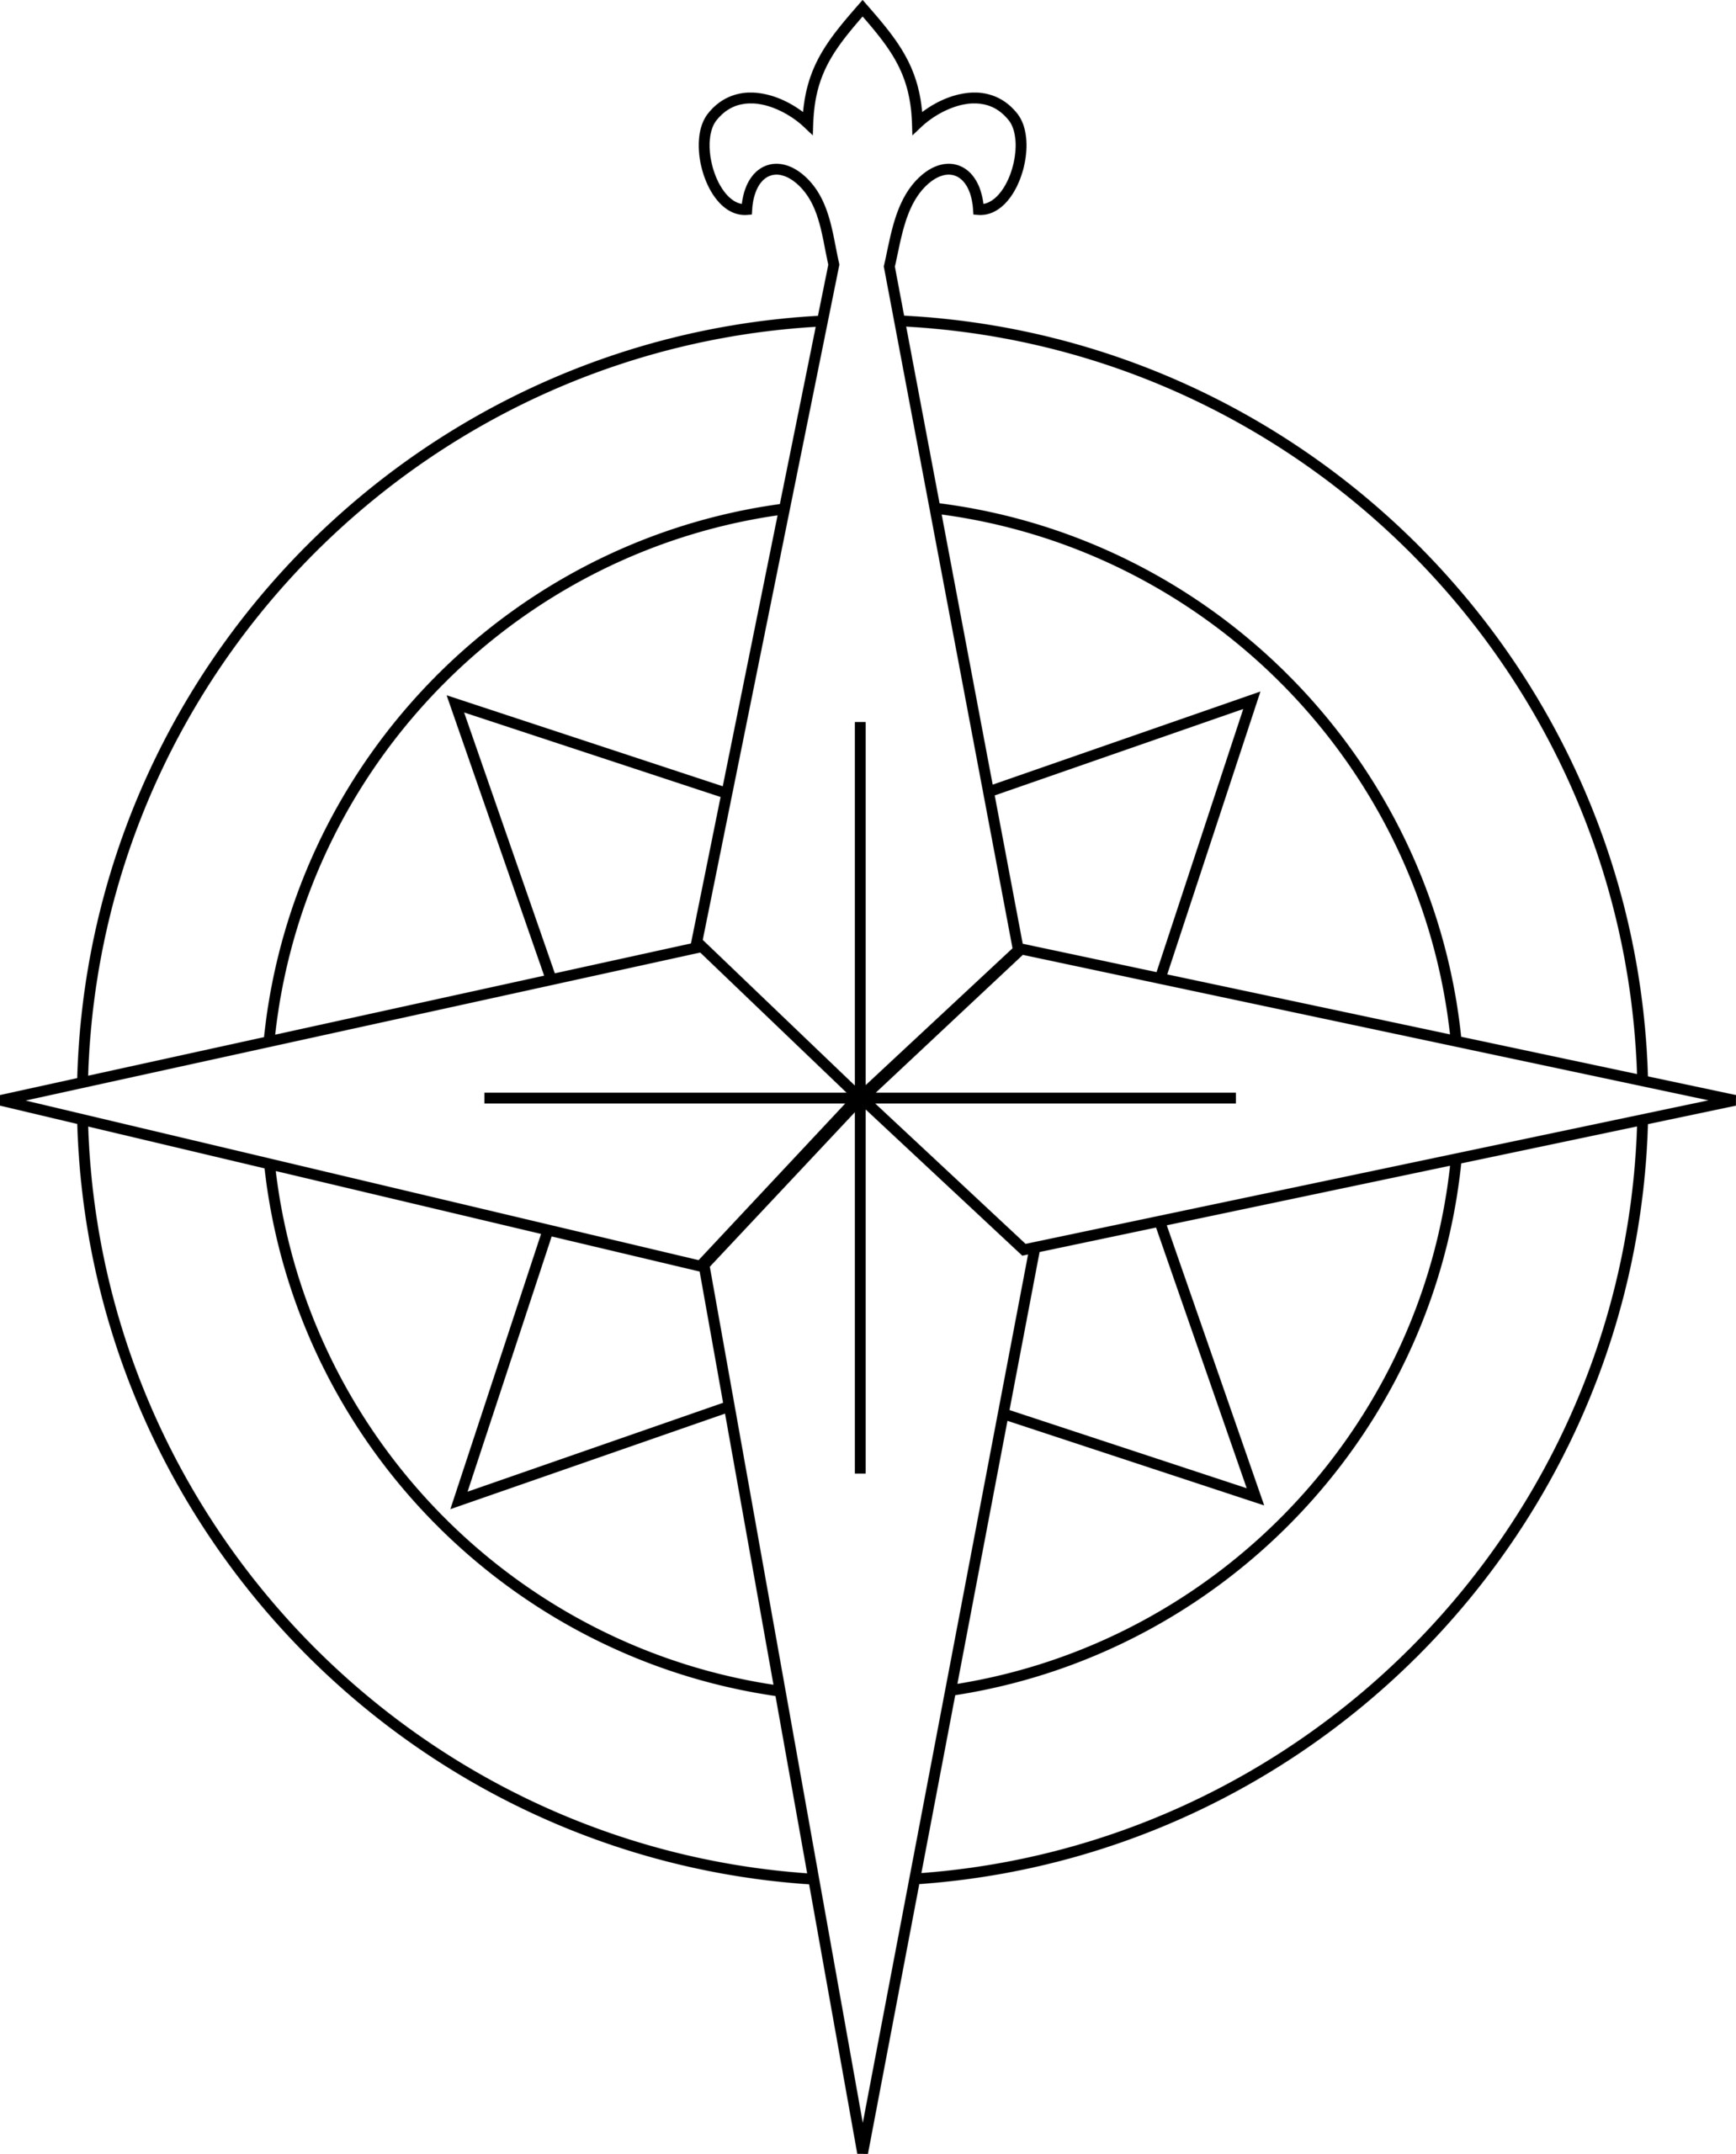 Free Compass Rose Template Download Free Clip Art Free Clip Art On